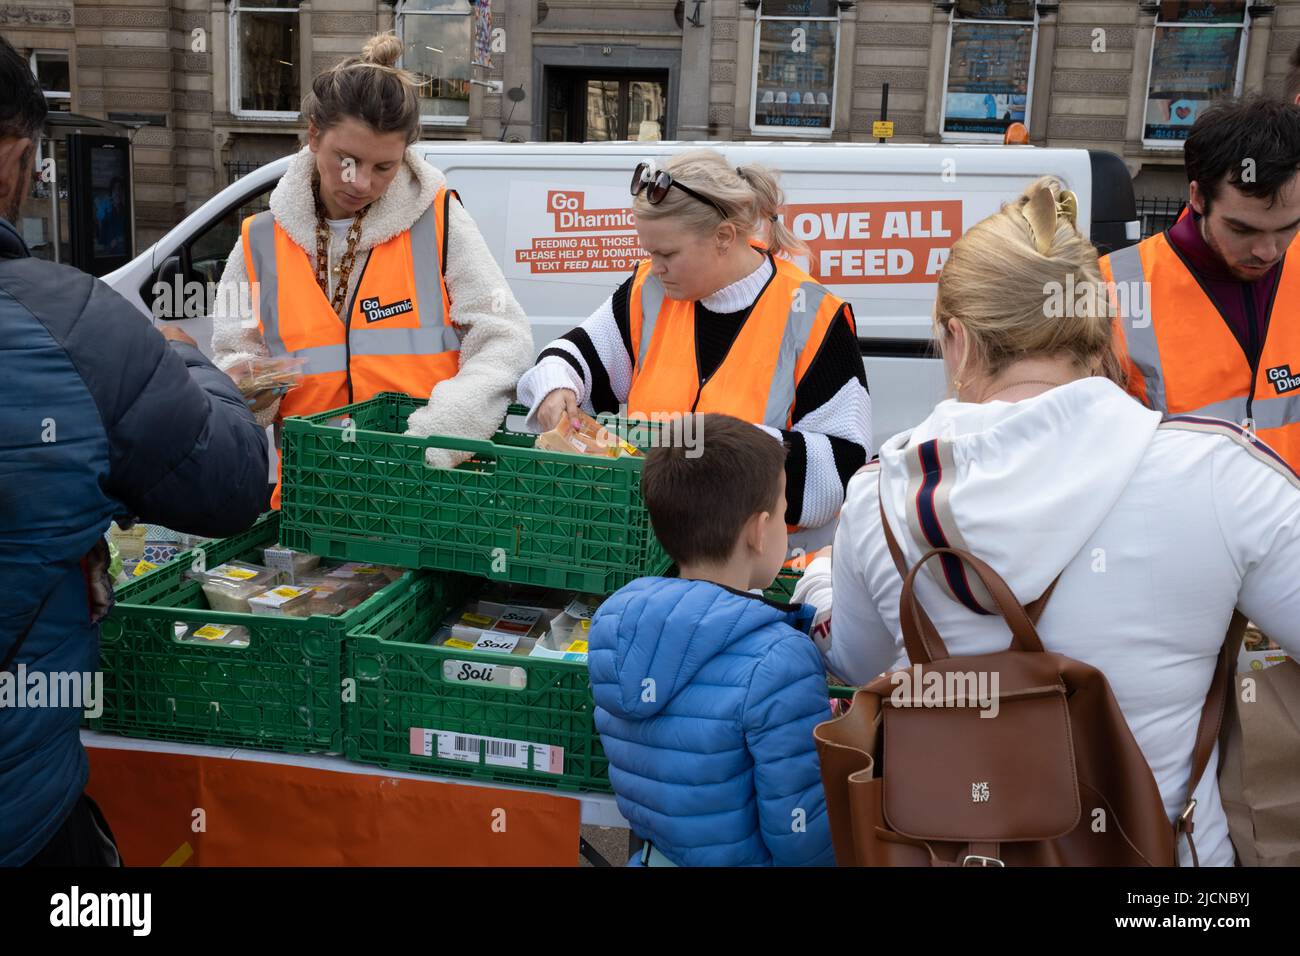 Glasgow, UK, 14 June 2022. People avail themselves of free food at at foodbank, run by the Go Dharmic #FeedEveryone campaign, which distributes 1000’s of meals across the country & strives towards minimising the #hunger crisis. A weekly event in George Square, in Glasgow, Scotland, on 14 June 2022. Photo credit: Jeremy Sutton-Hibbert/Alamy Live News. Stock Photo